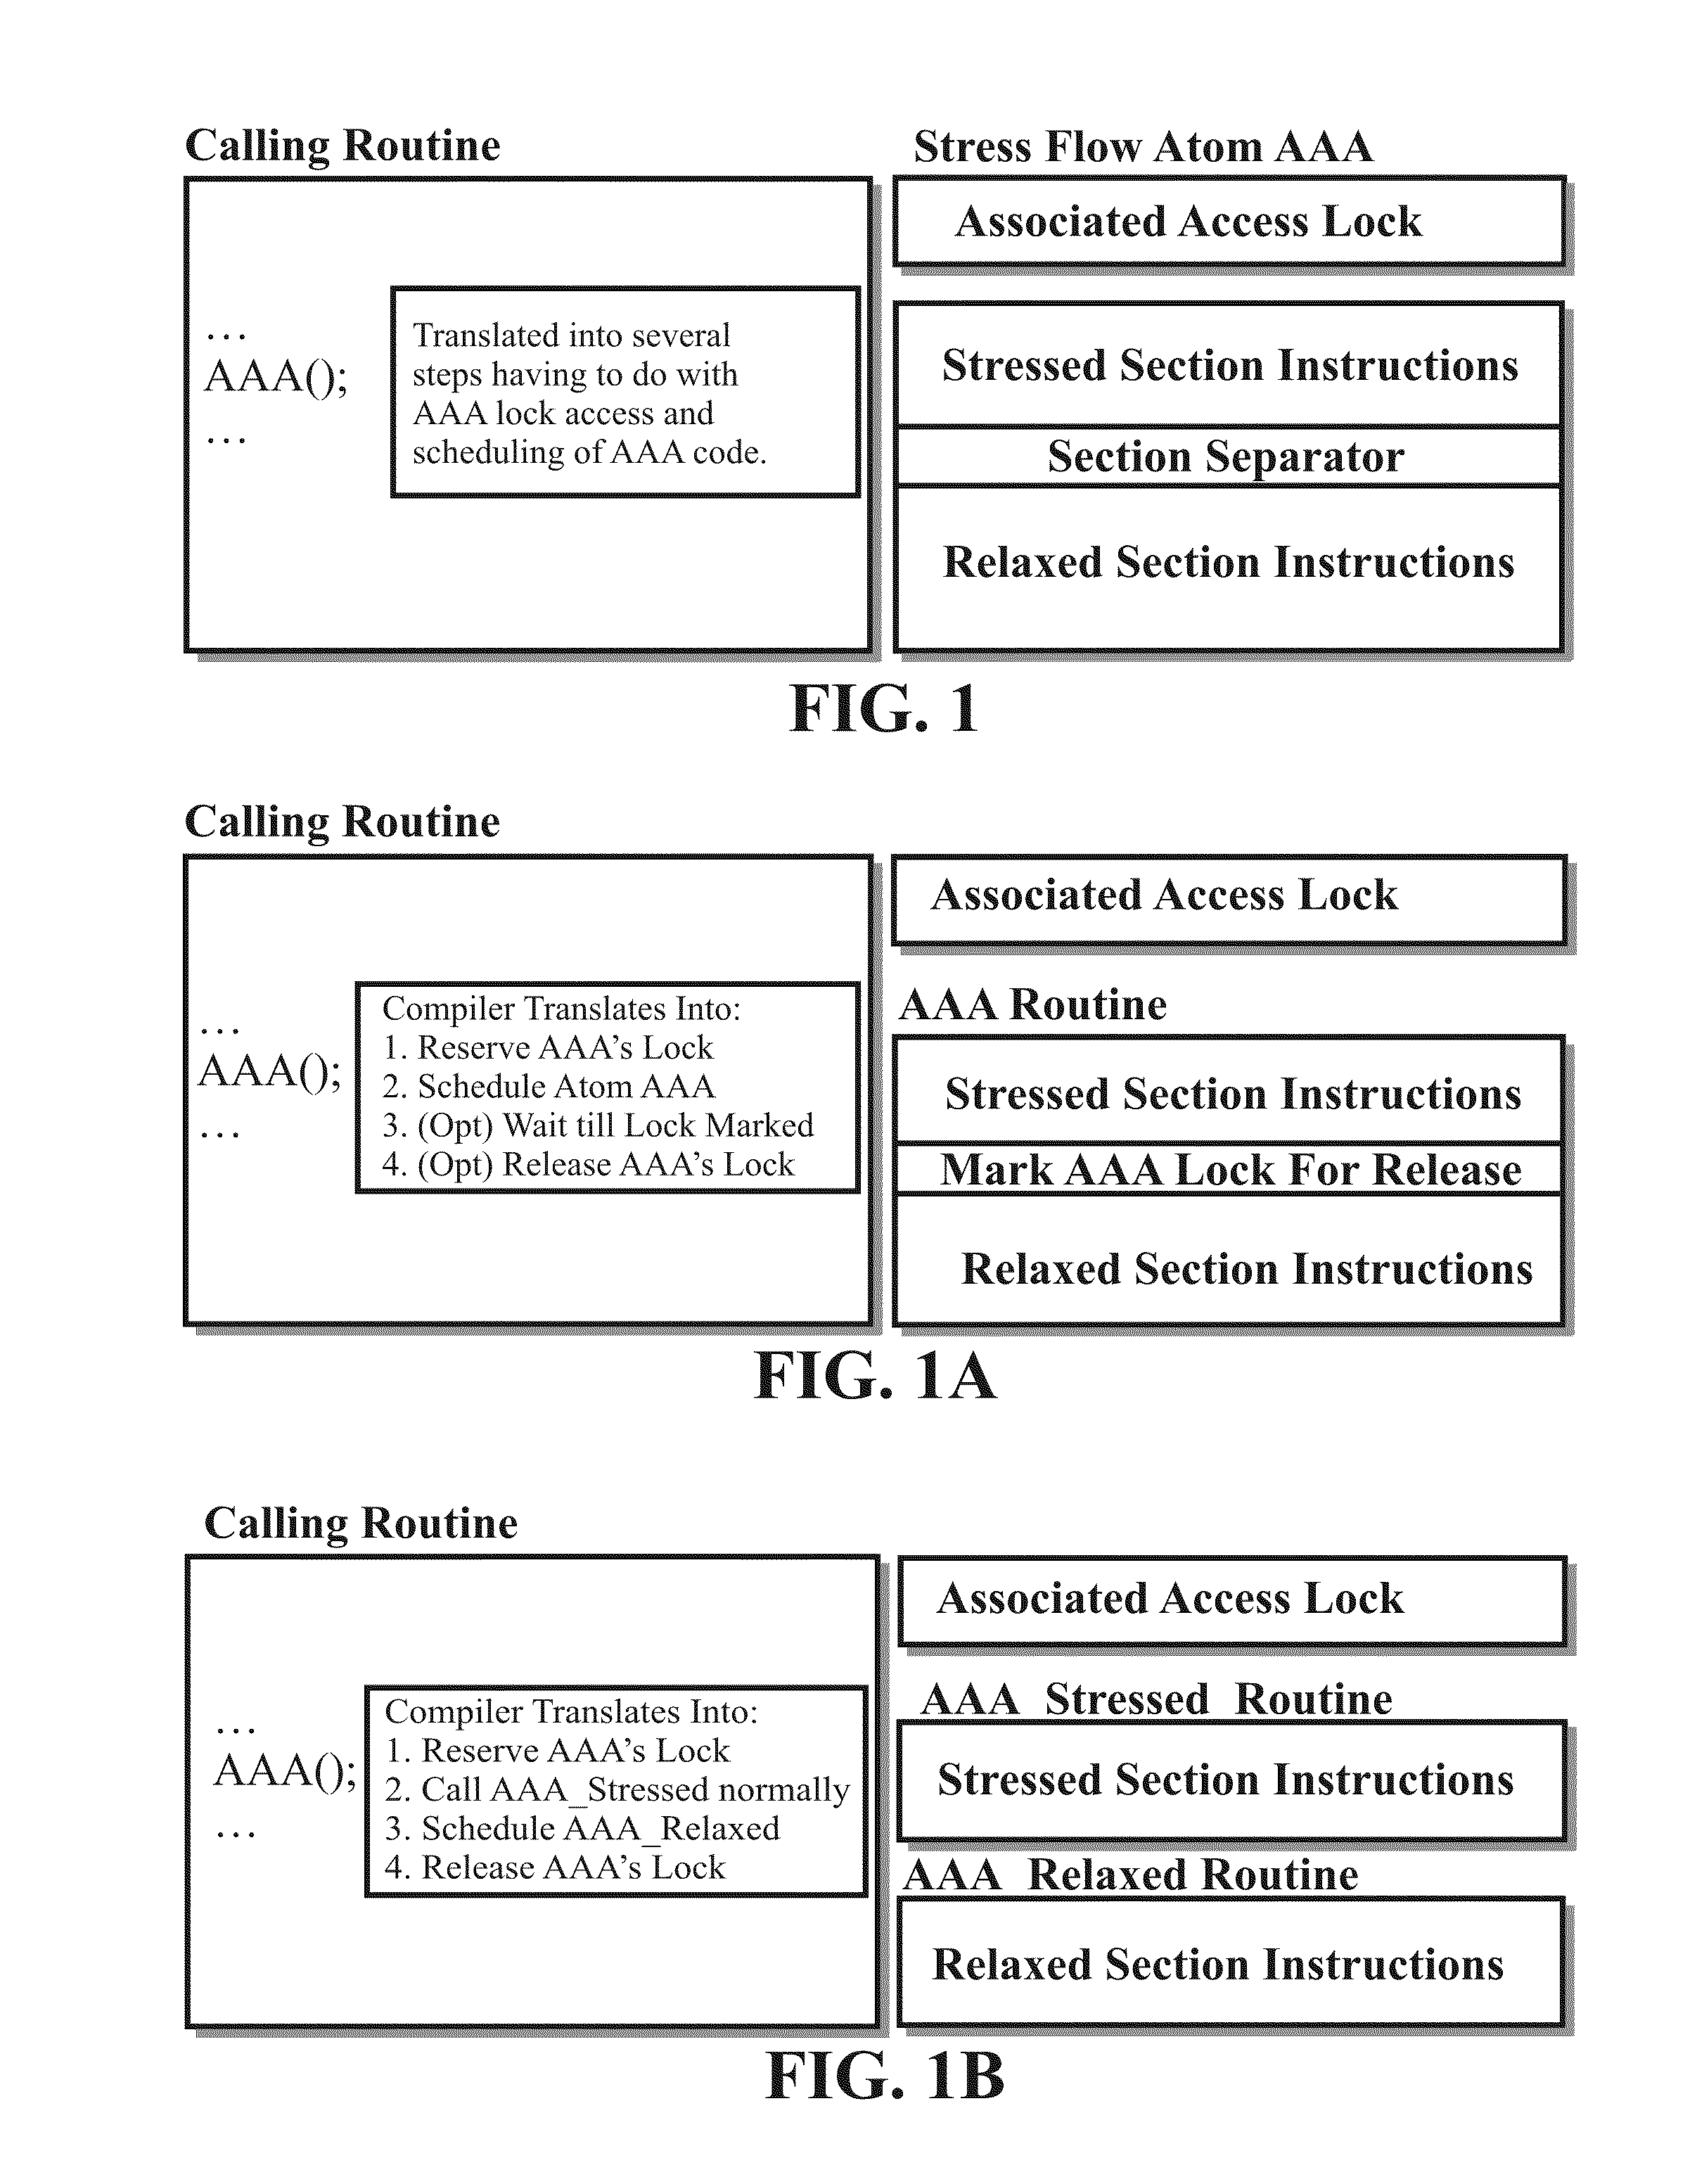 Object-Oriented Support for Dynamic Assignment of Parallel Computing Resources